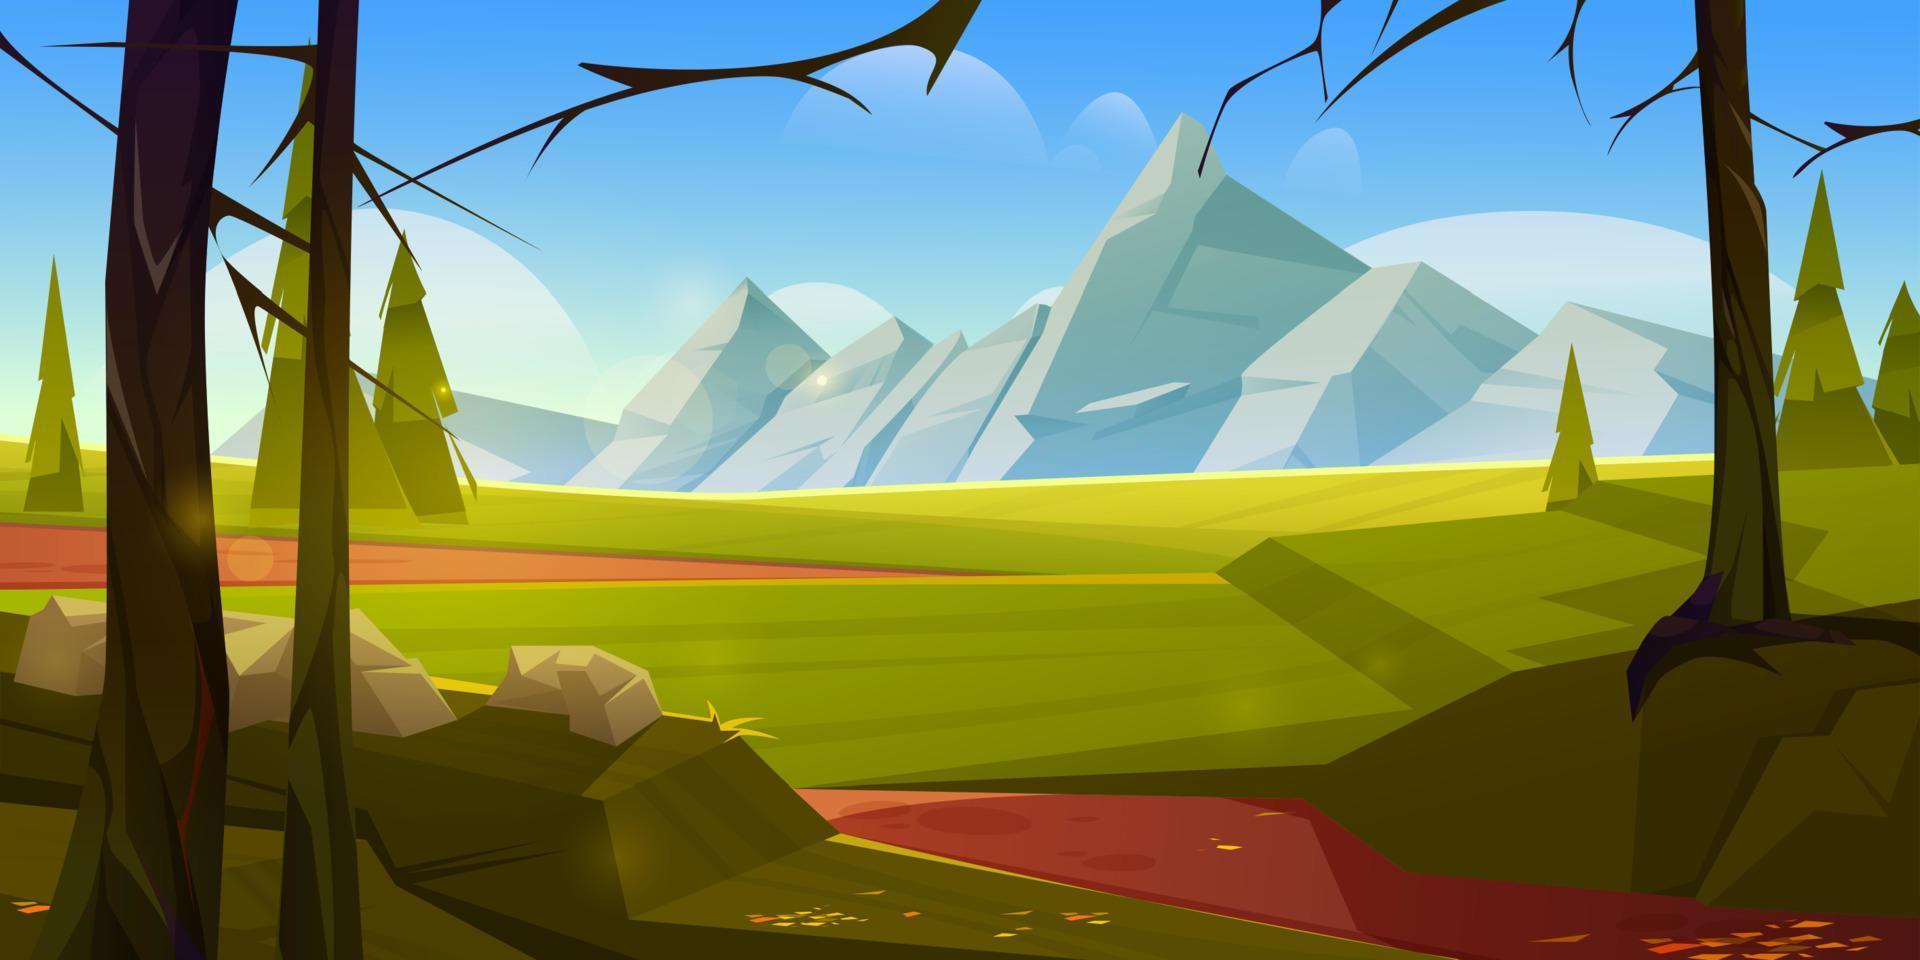 Cartoon nature landscape with mountains and field vector